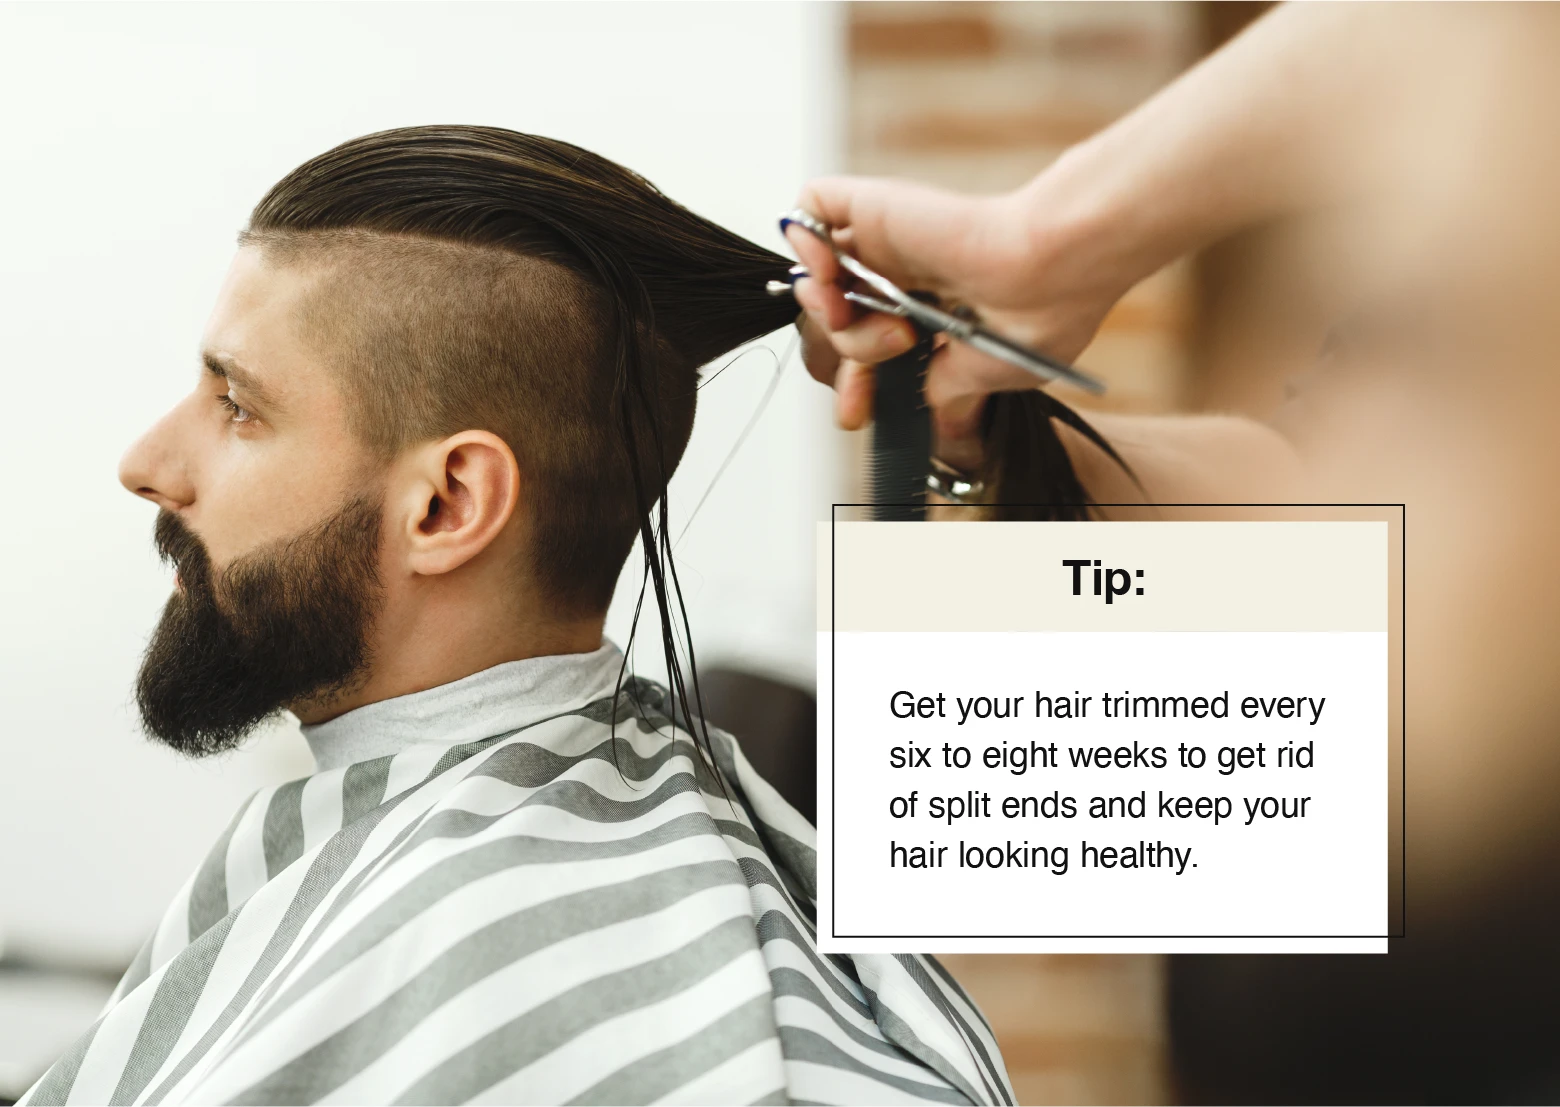 Get your hair trimmed every six to eight weeks to get rid of split ends and keep your hair looking healthy when you grow out your hair.